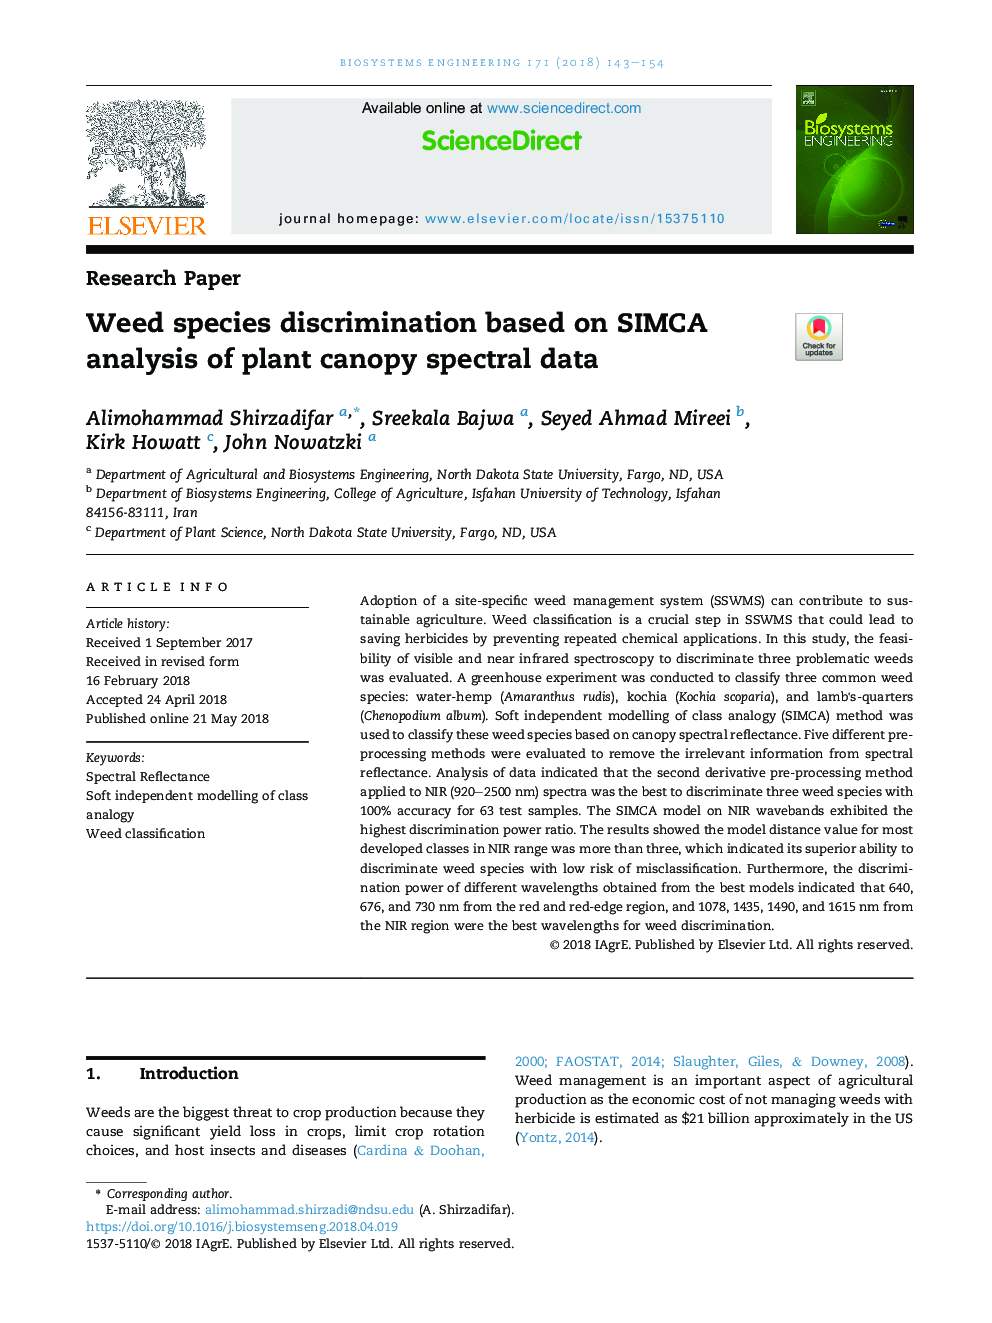 Weed species discrimination based on SIMCA analysis of plant canopy spectral data